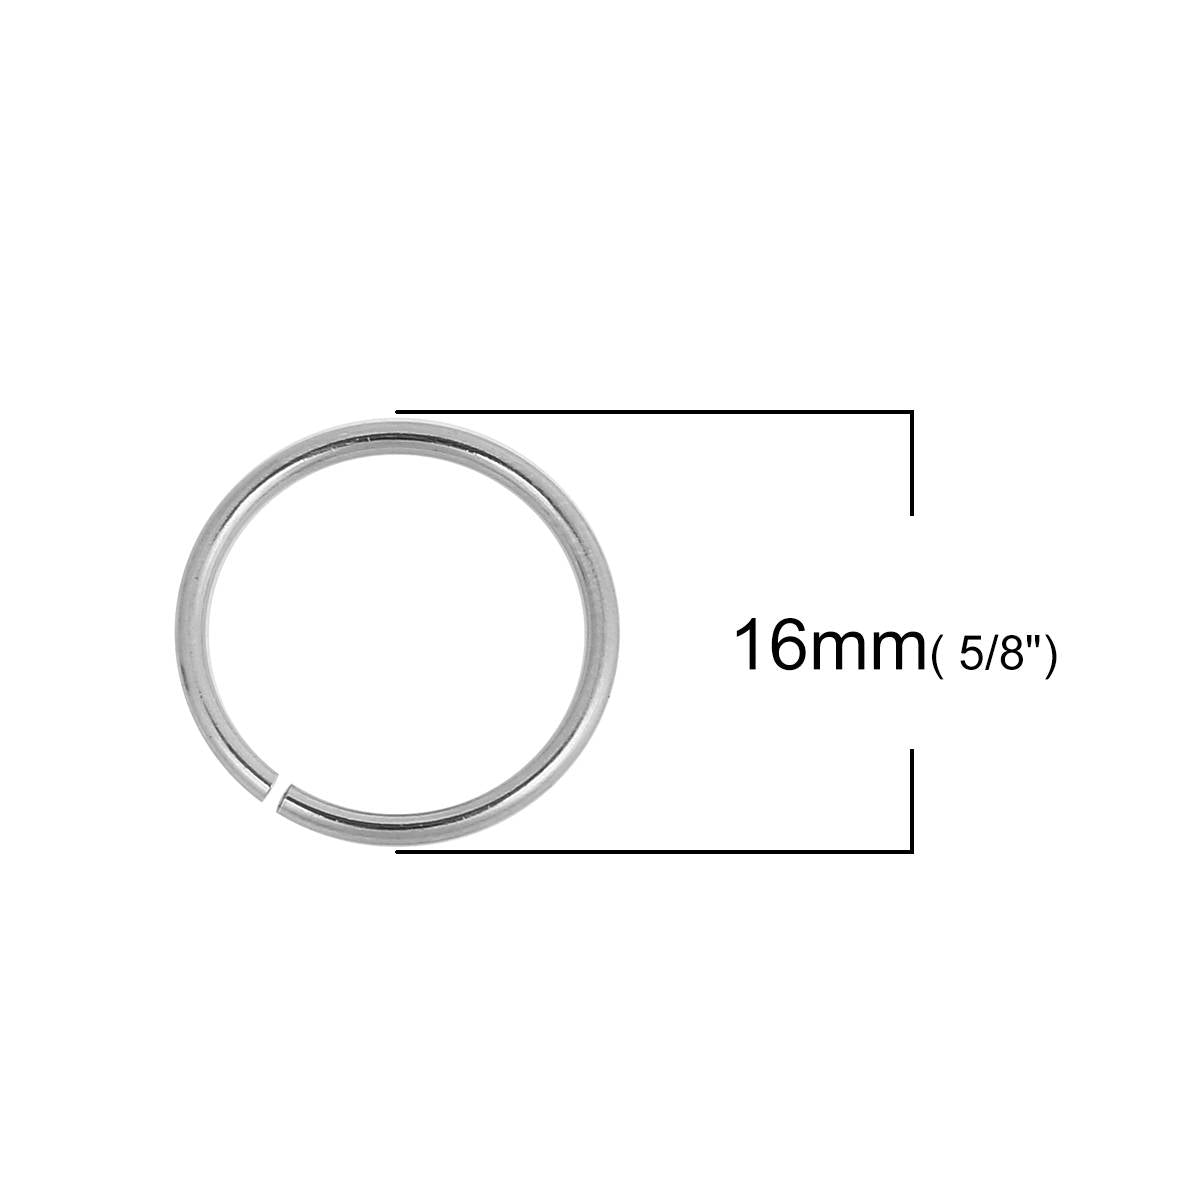 Silver stainless steel jump rings 3mm to 16mm, all gauges